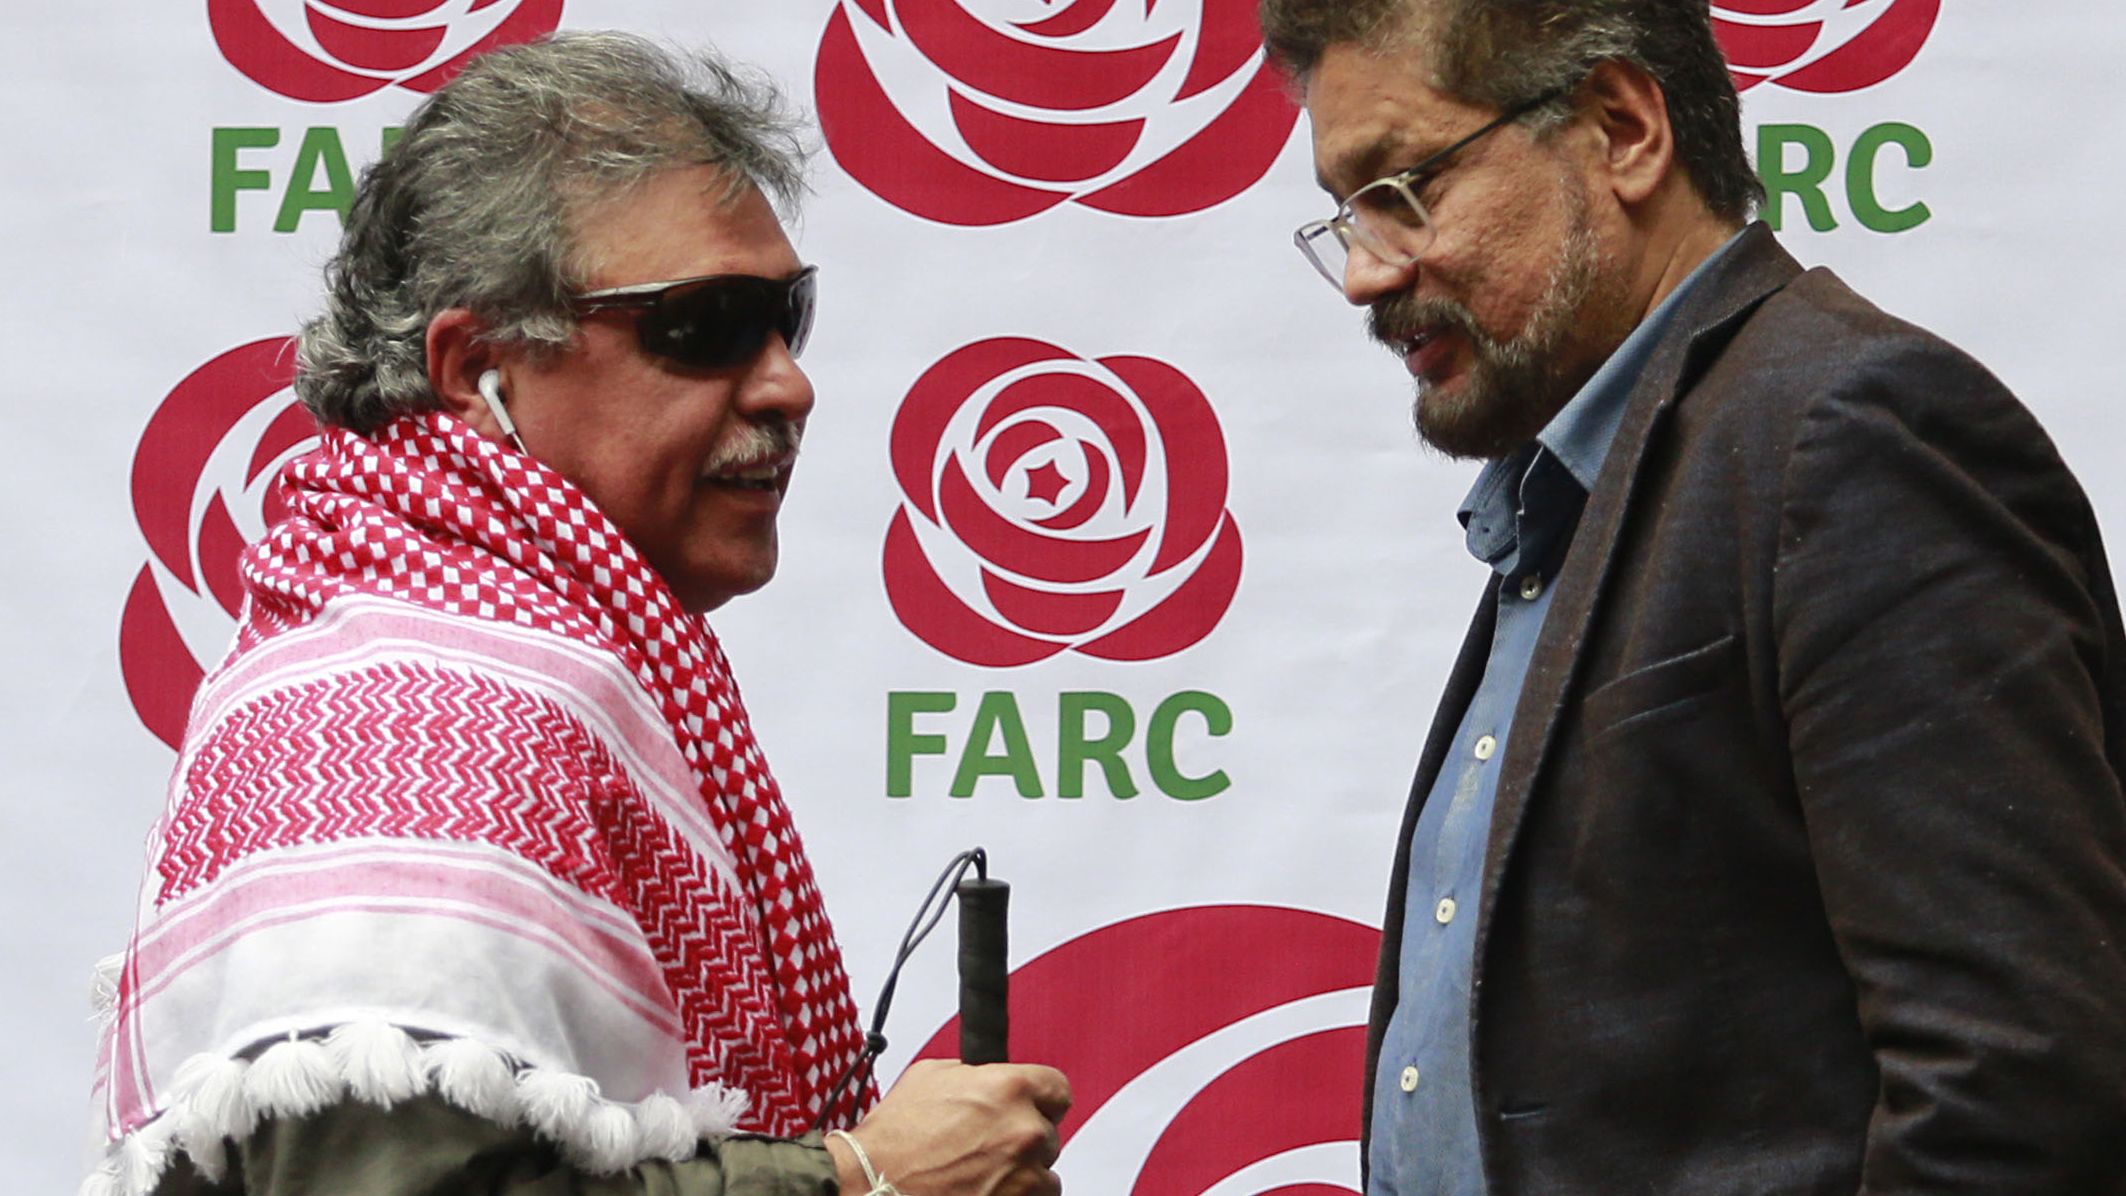 'Jesus Santrich' (L) and fellow FARC commander Ivan Marquez after the former guerrilla group registered as a political party in 2017.